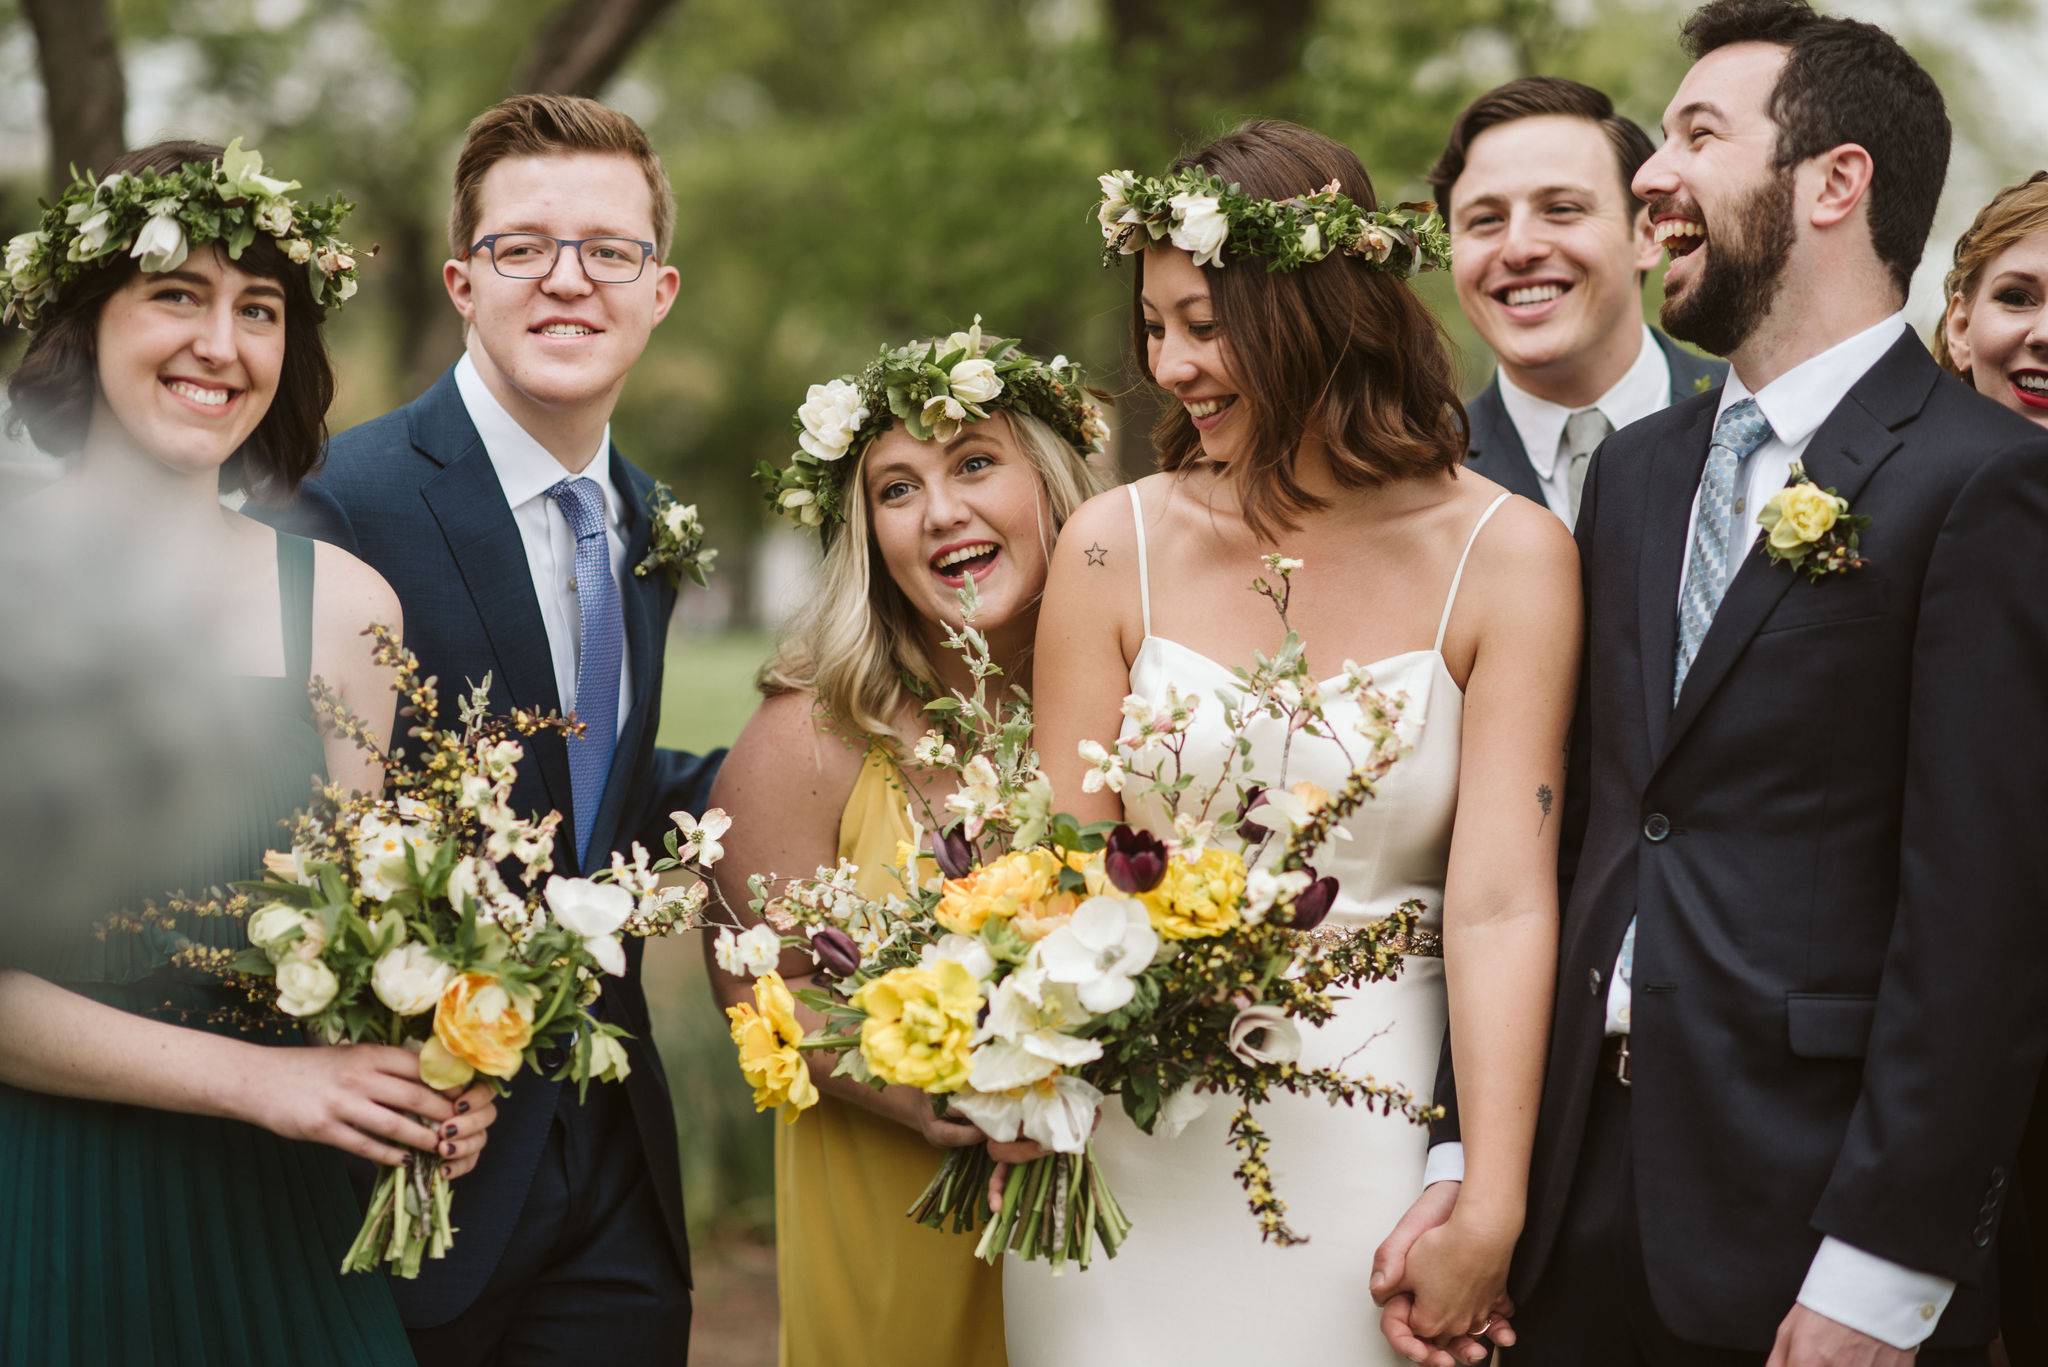  Washington DC, Maryland Wedding Photographer, Alexandria, Old Town, Jewel Tone, Romantic, Modern, Friends posing with bride and groom, Flower crowns, Sungold Flower Co 